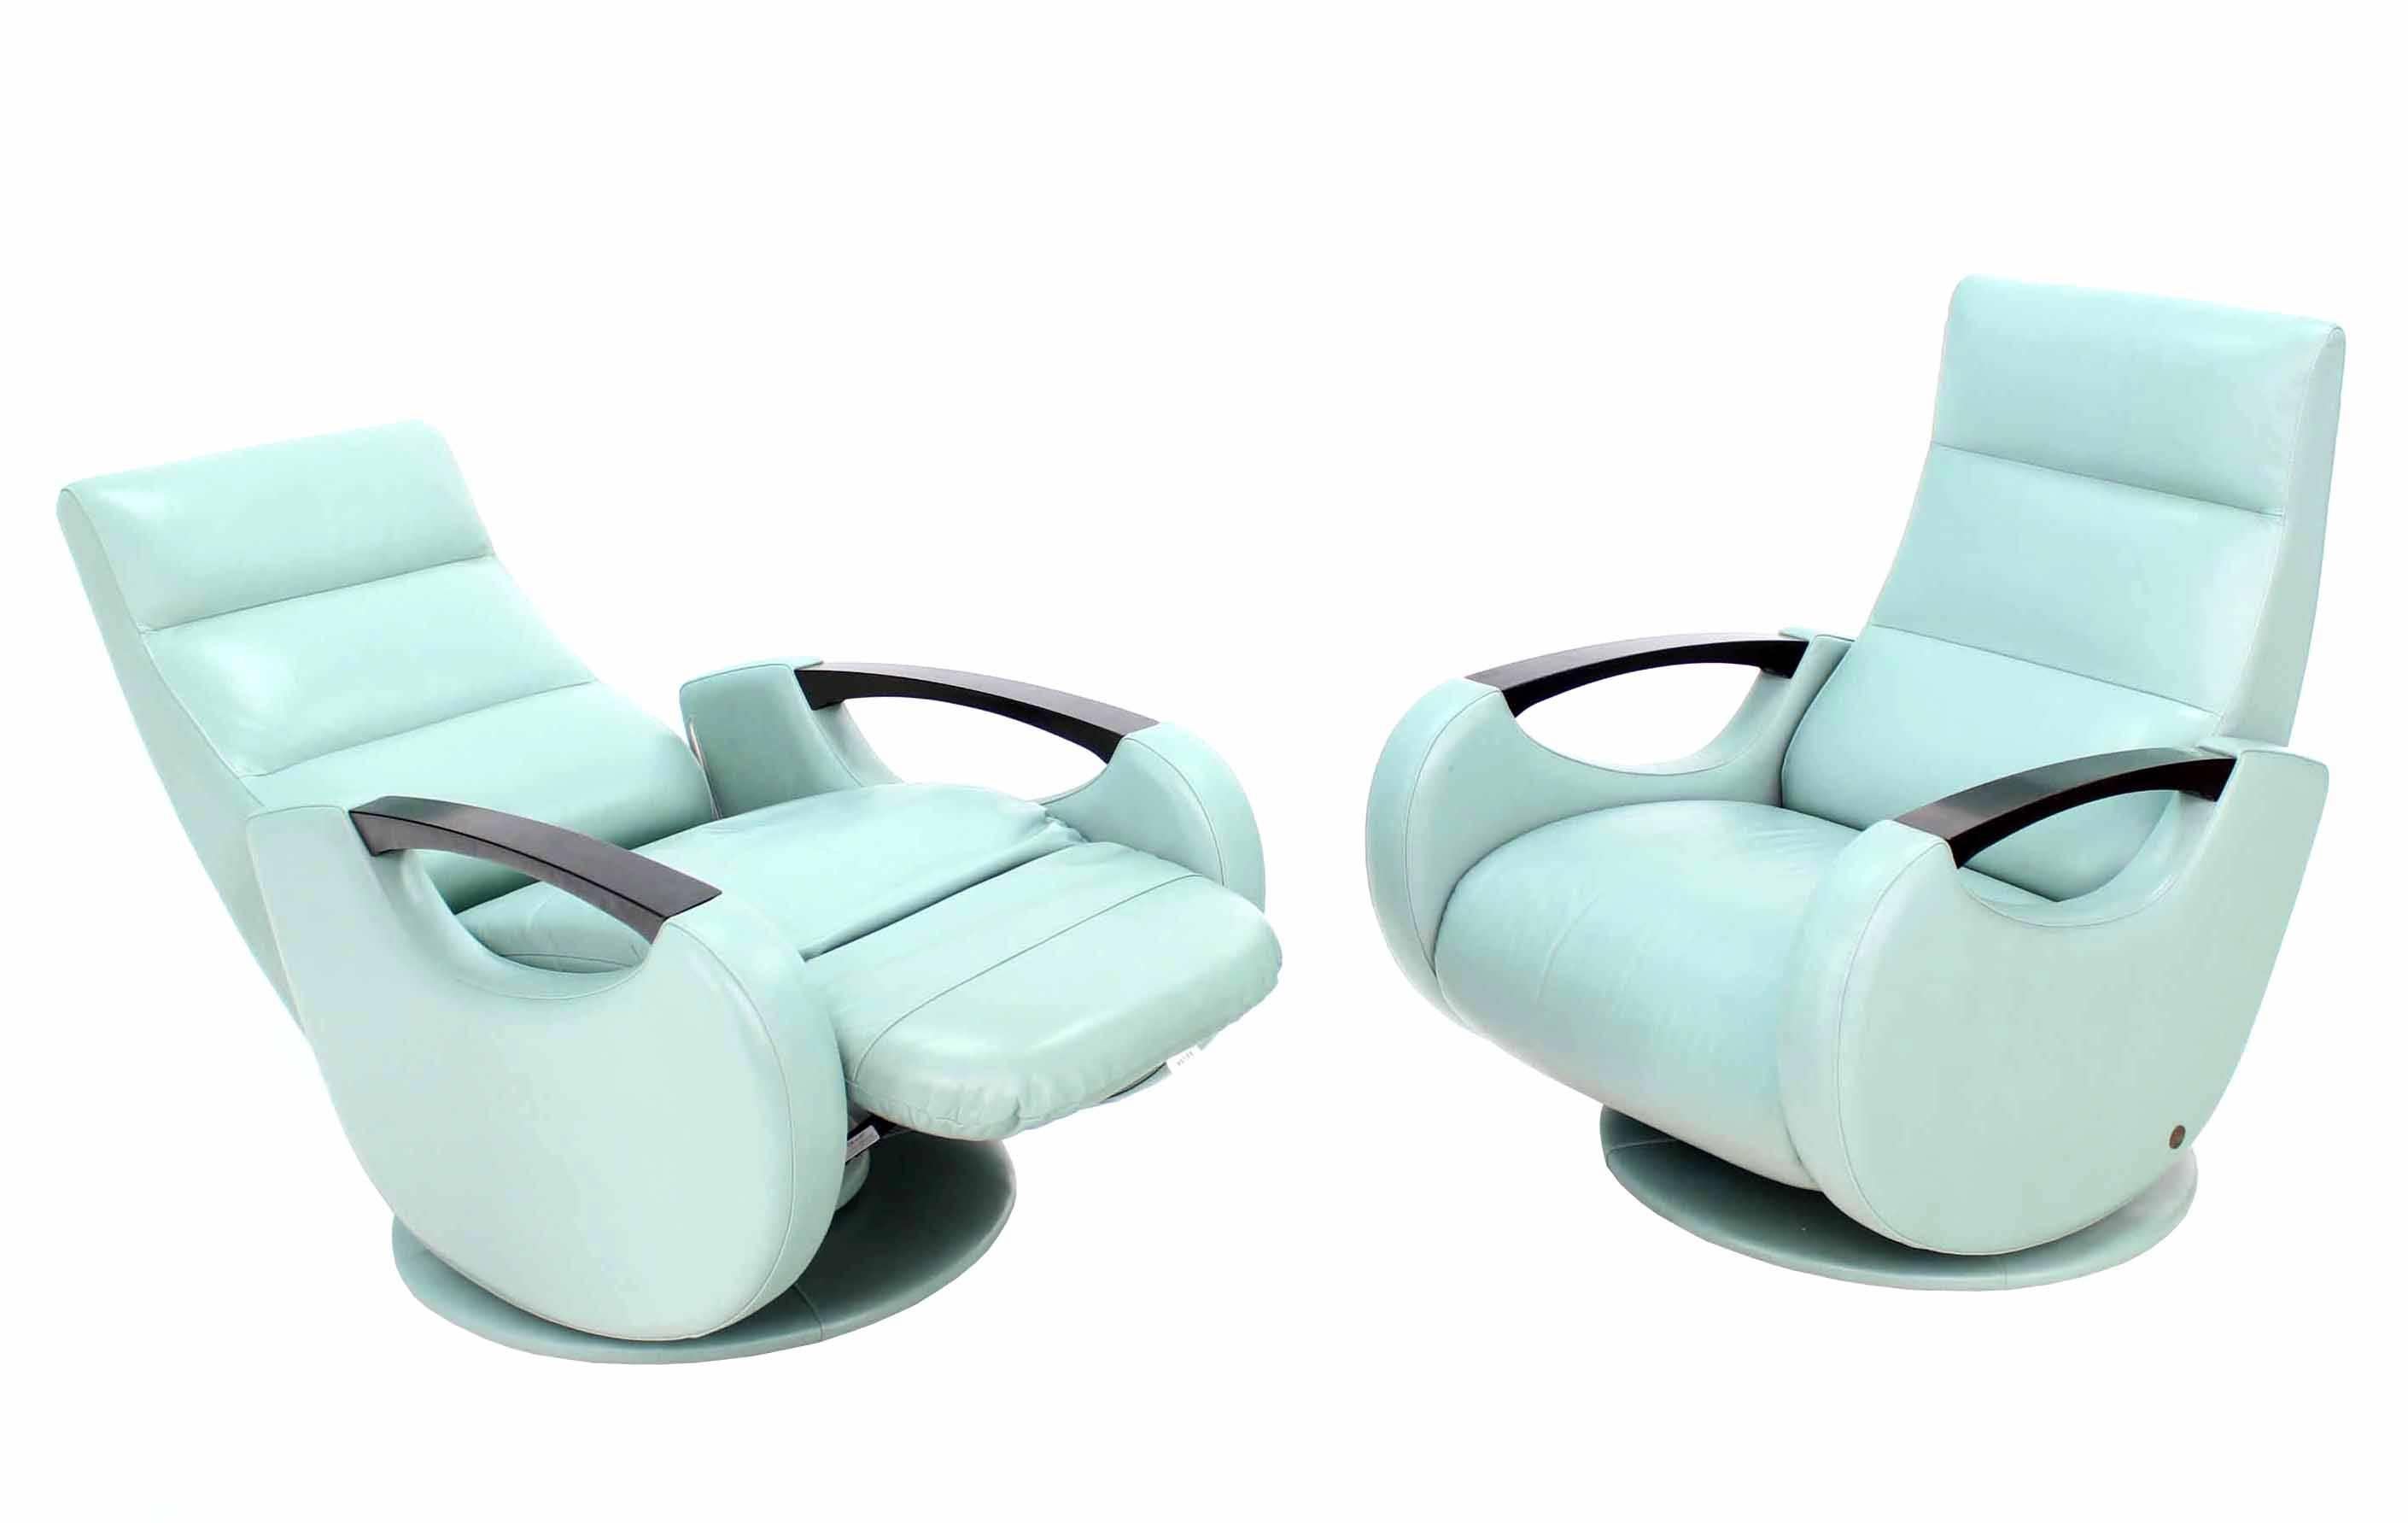 Pair of space age Mid Century modern swivel lounge chairs recliners. This is a very unusual looking and very comfortable pair of chairs.